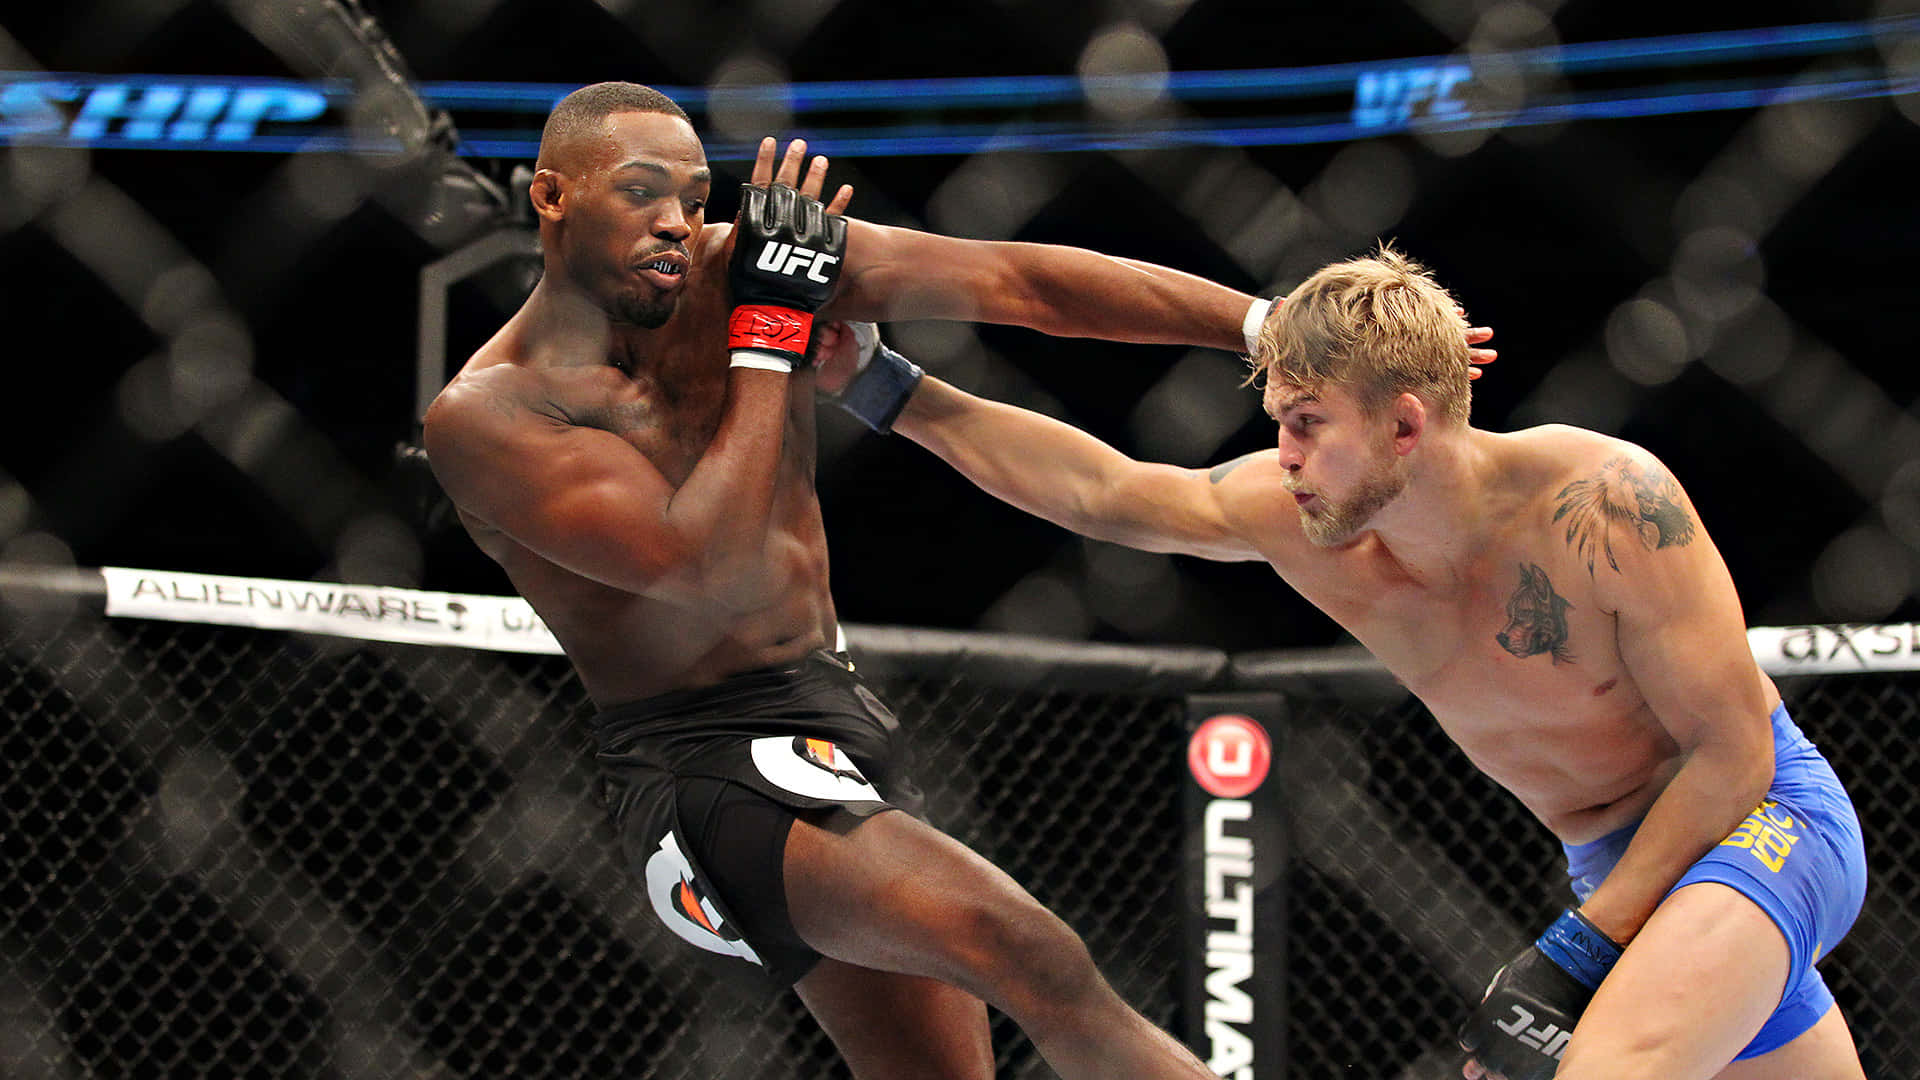 Alexander Gustafsson Delivering Powerful Punch to Jon Jones in UFC Bout Wallpaper